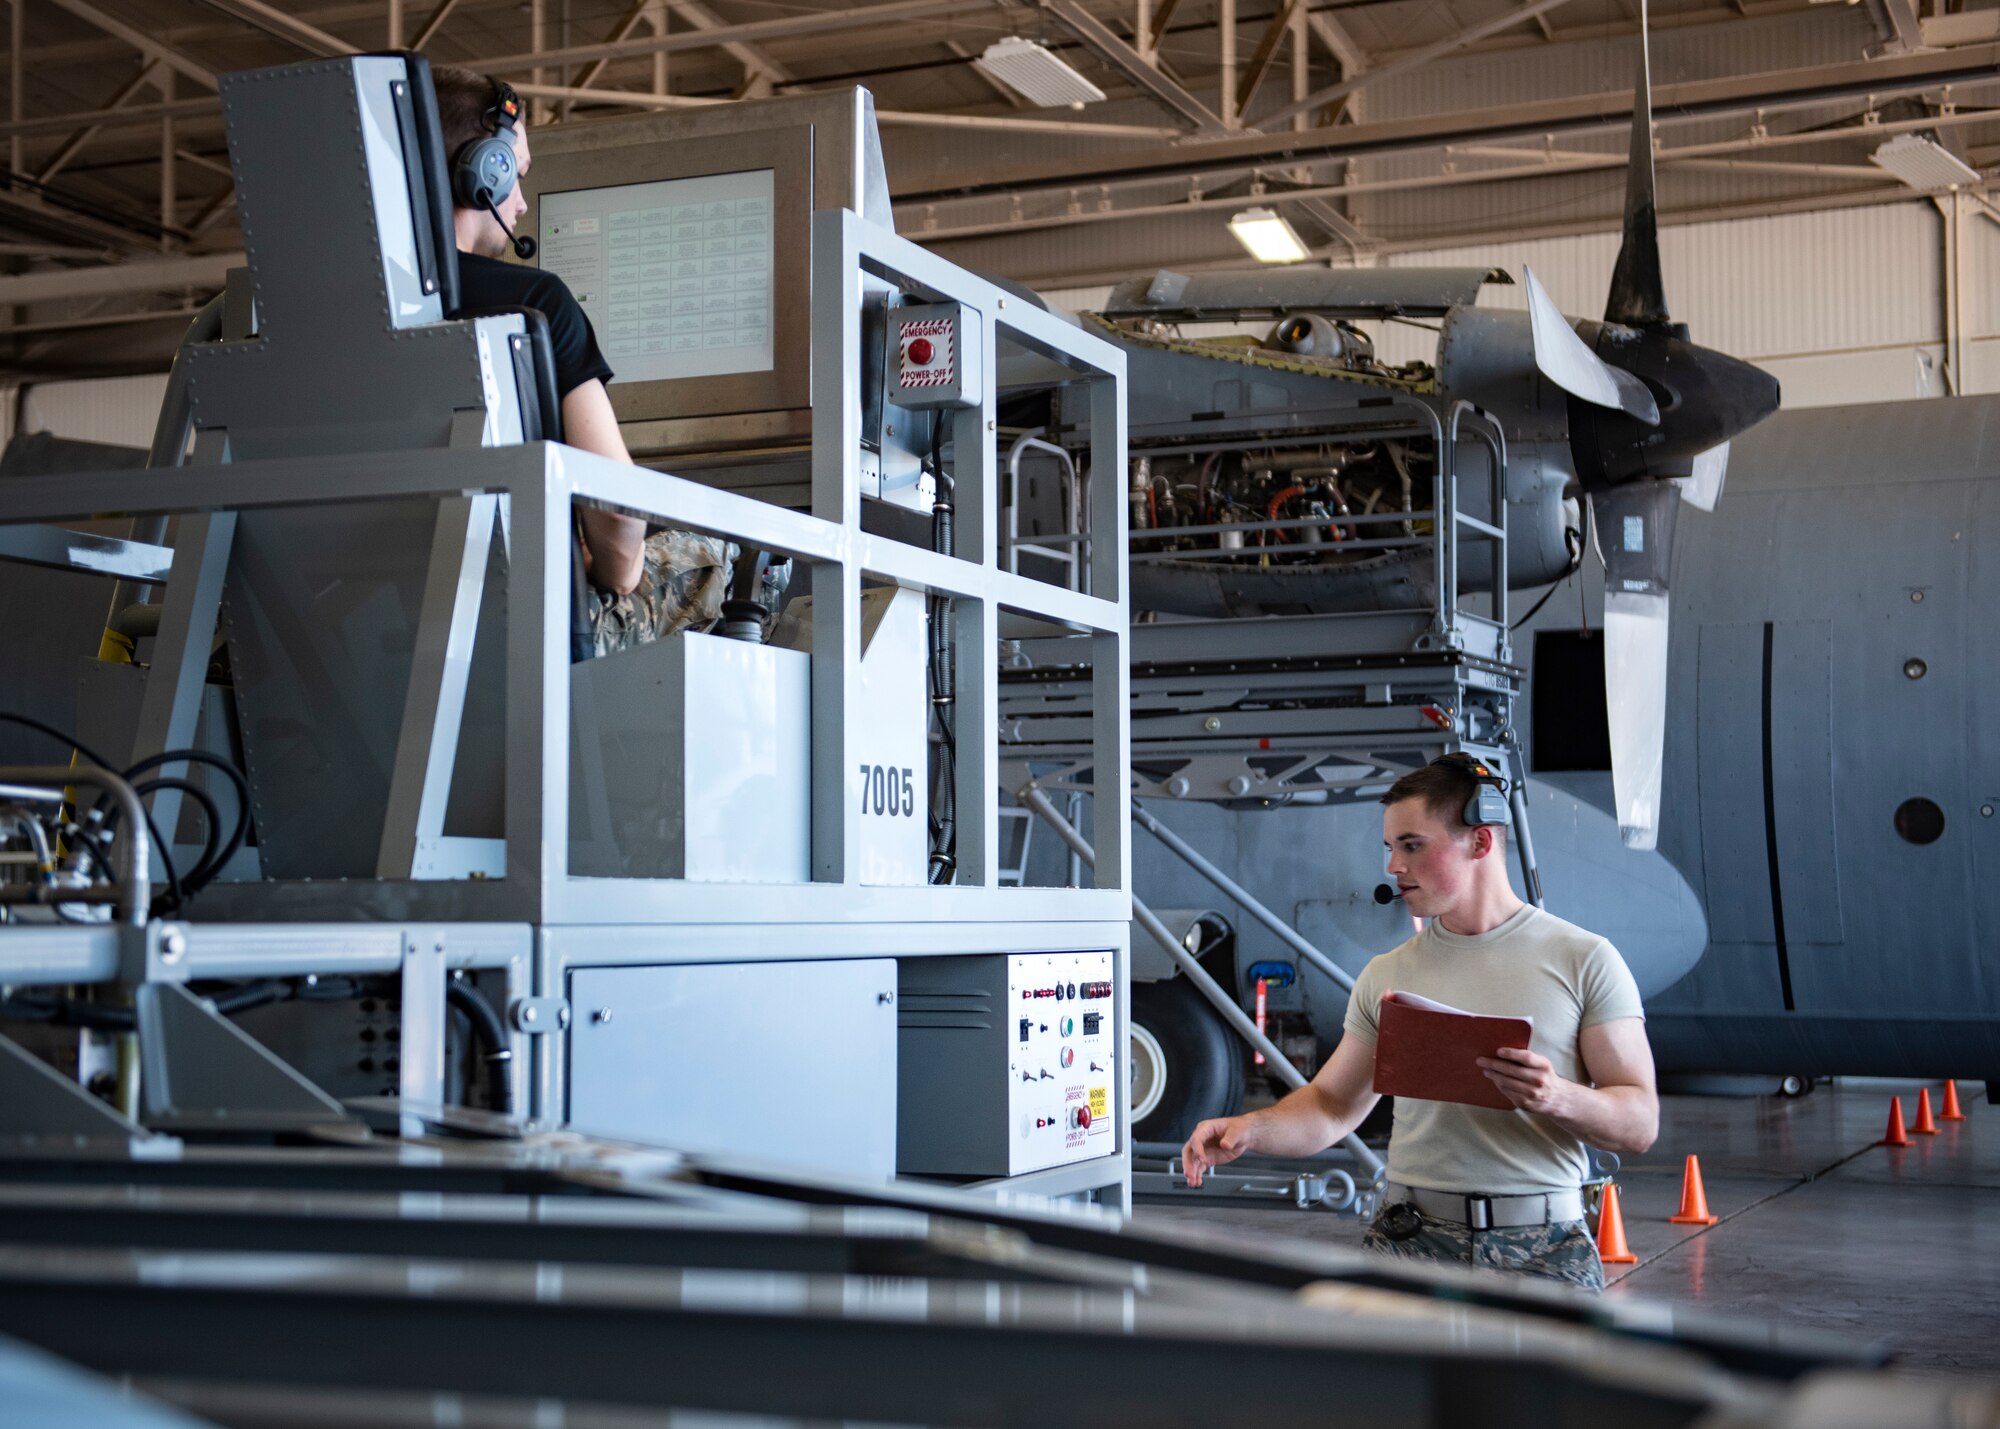 Airman 1st Class Kyle Jaycox, above, and Airman 1st Class Matthew Higgs, 364th Training Squadron hydraulic systems apprentice course students, troubleshoot the hydrualic systems in a flight control simulator at Sheppard Air Force Base, Texas, June 28, 2019. Jaycox plays the role of the pilot, activating the systems in the "flightdeck" as Higgs looks for any discrepancies on the ground. (U.S. Air Force photo by Airman 1st Class Pedro Tenorio)